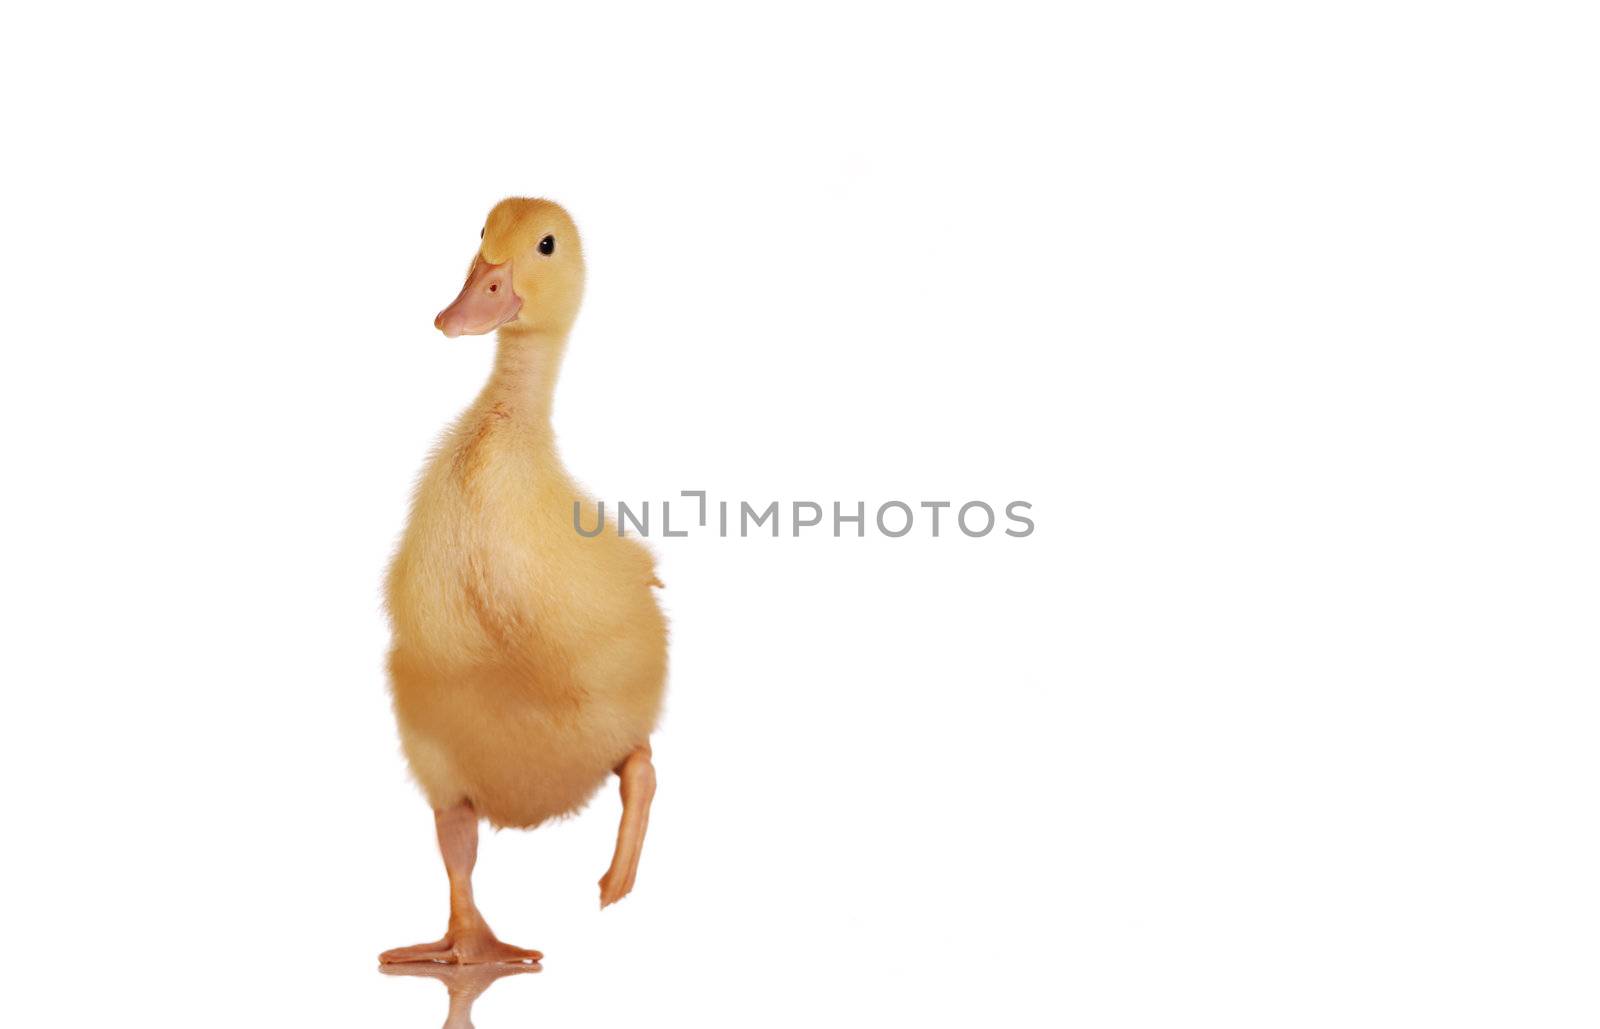 One young yellow duckling by jarenwicklund